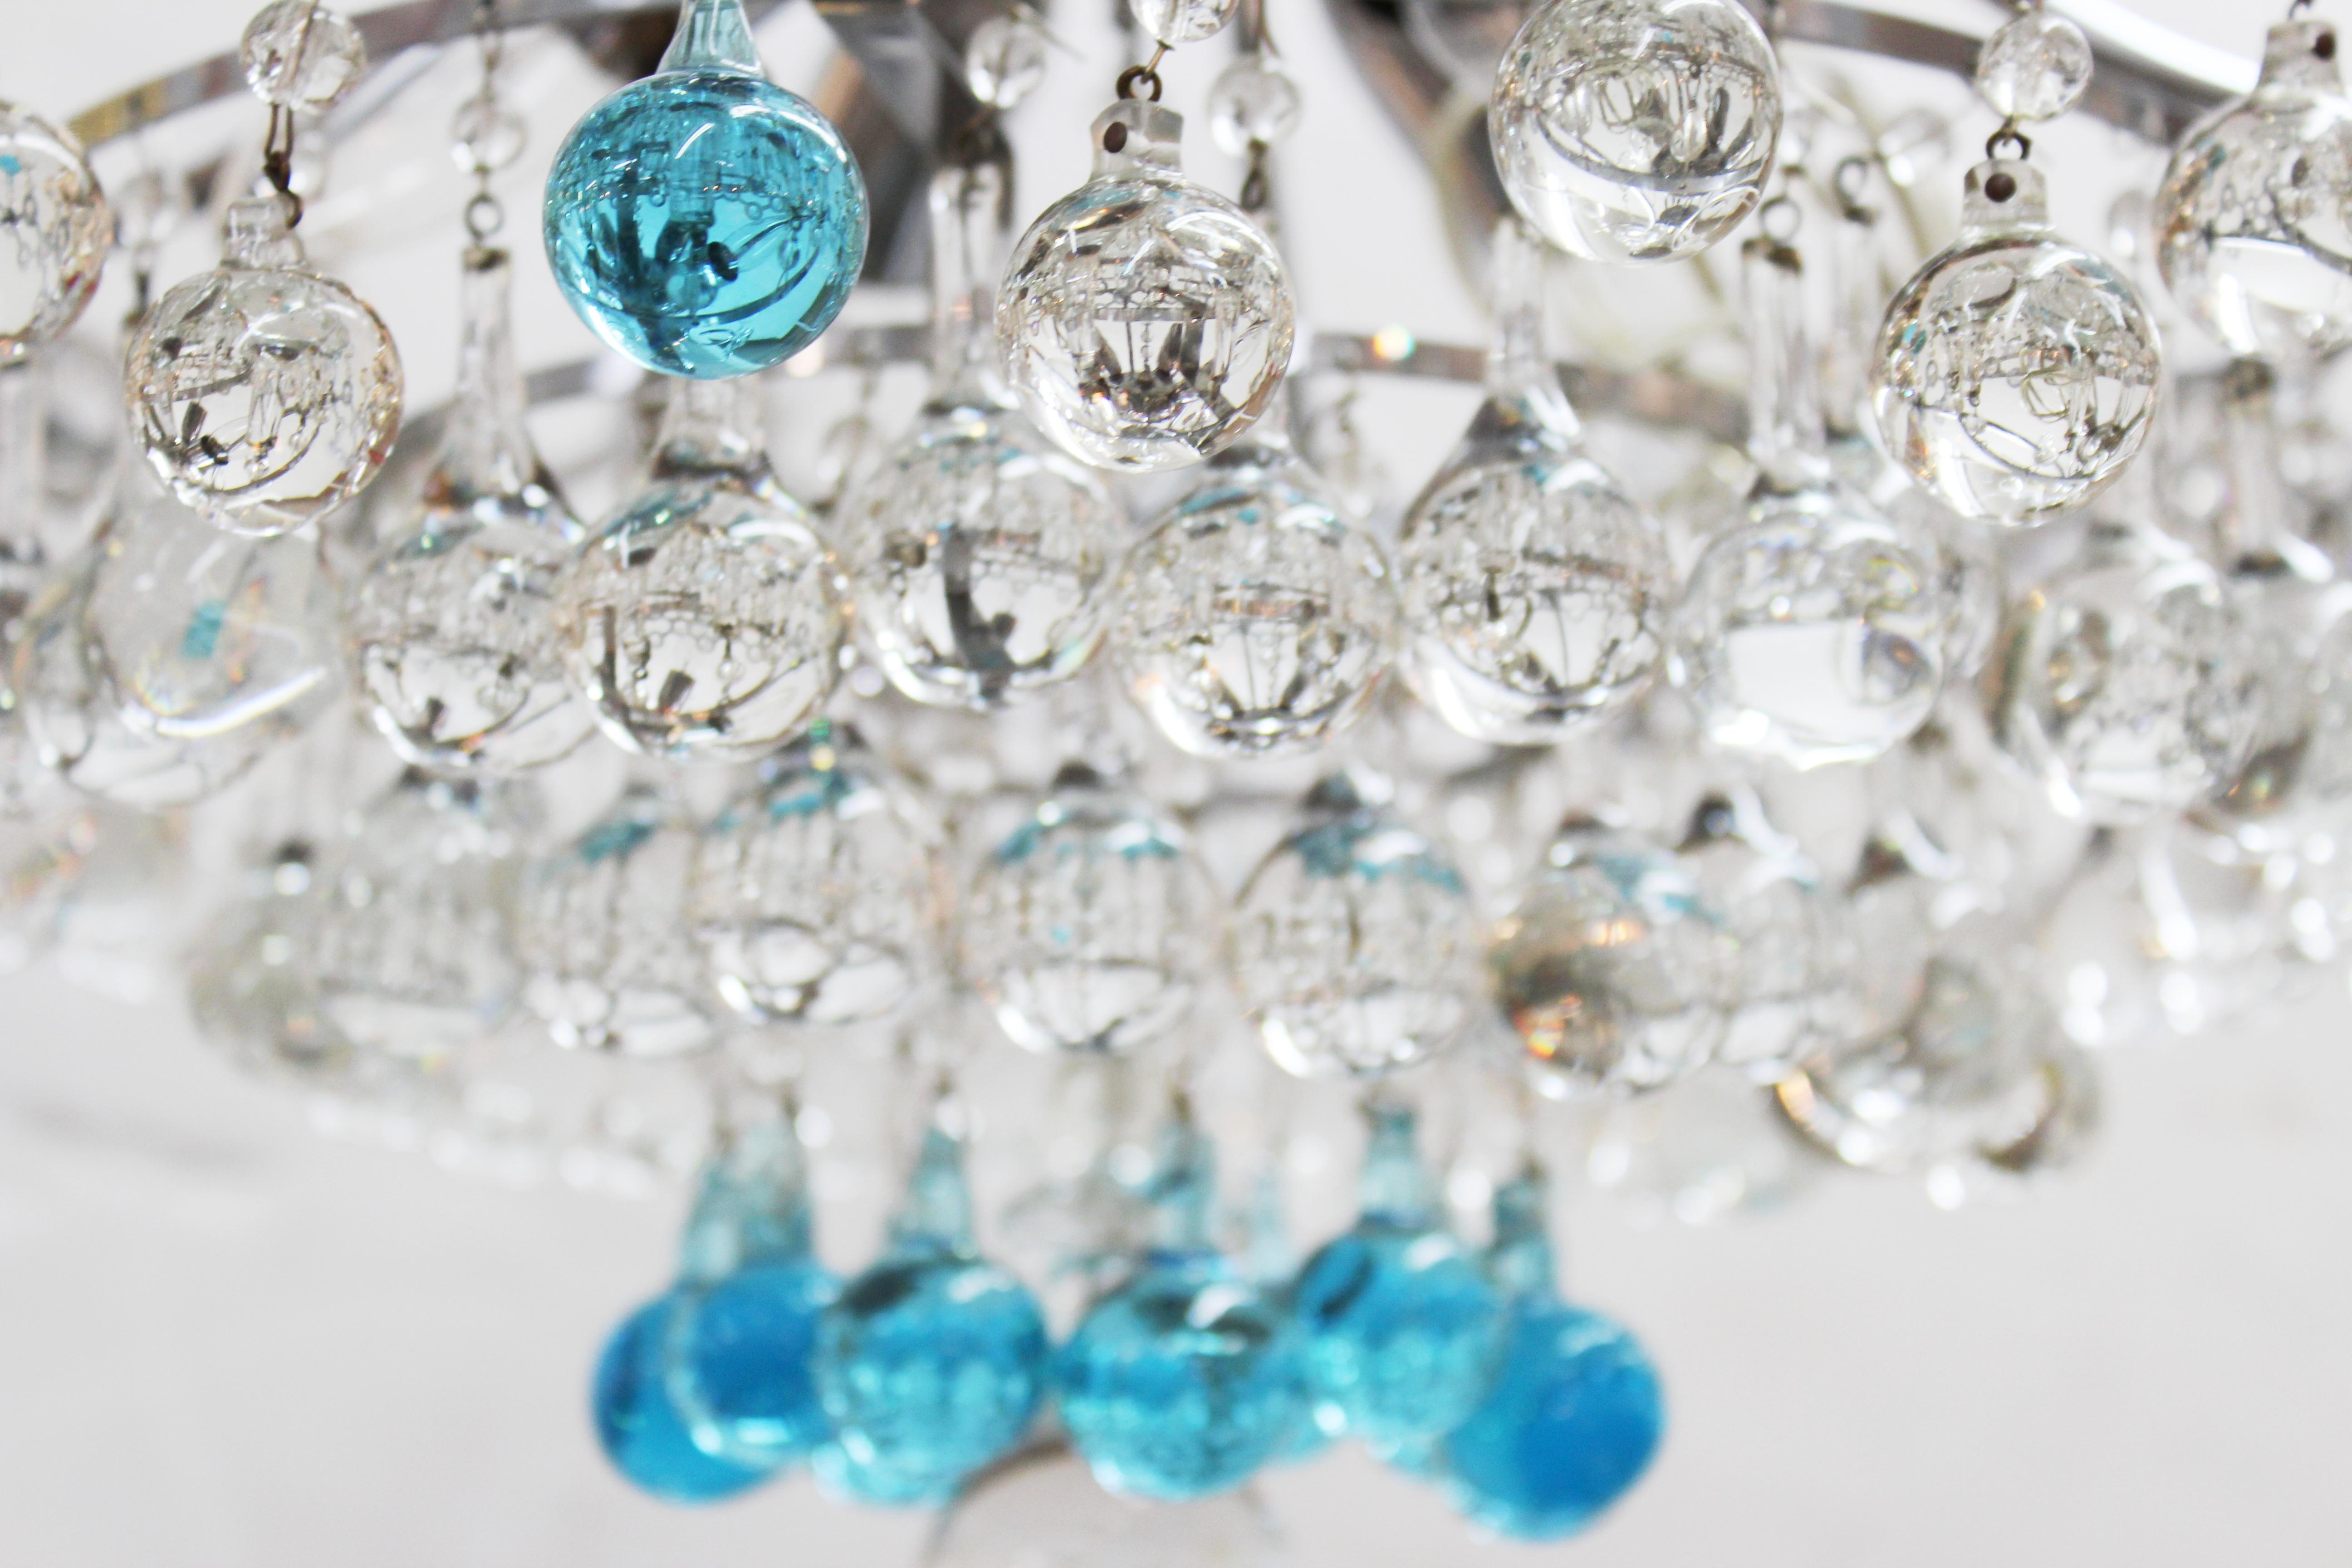 Italian Mid-Century Modern Chrome Chandelier with Clear & Turquoise Glass Balls 1